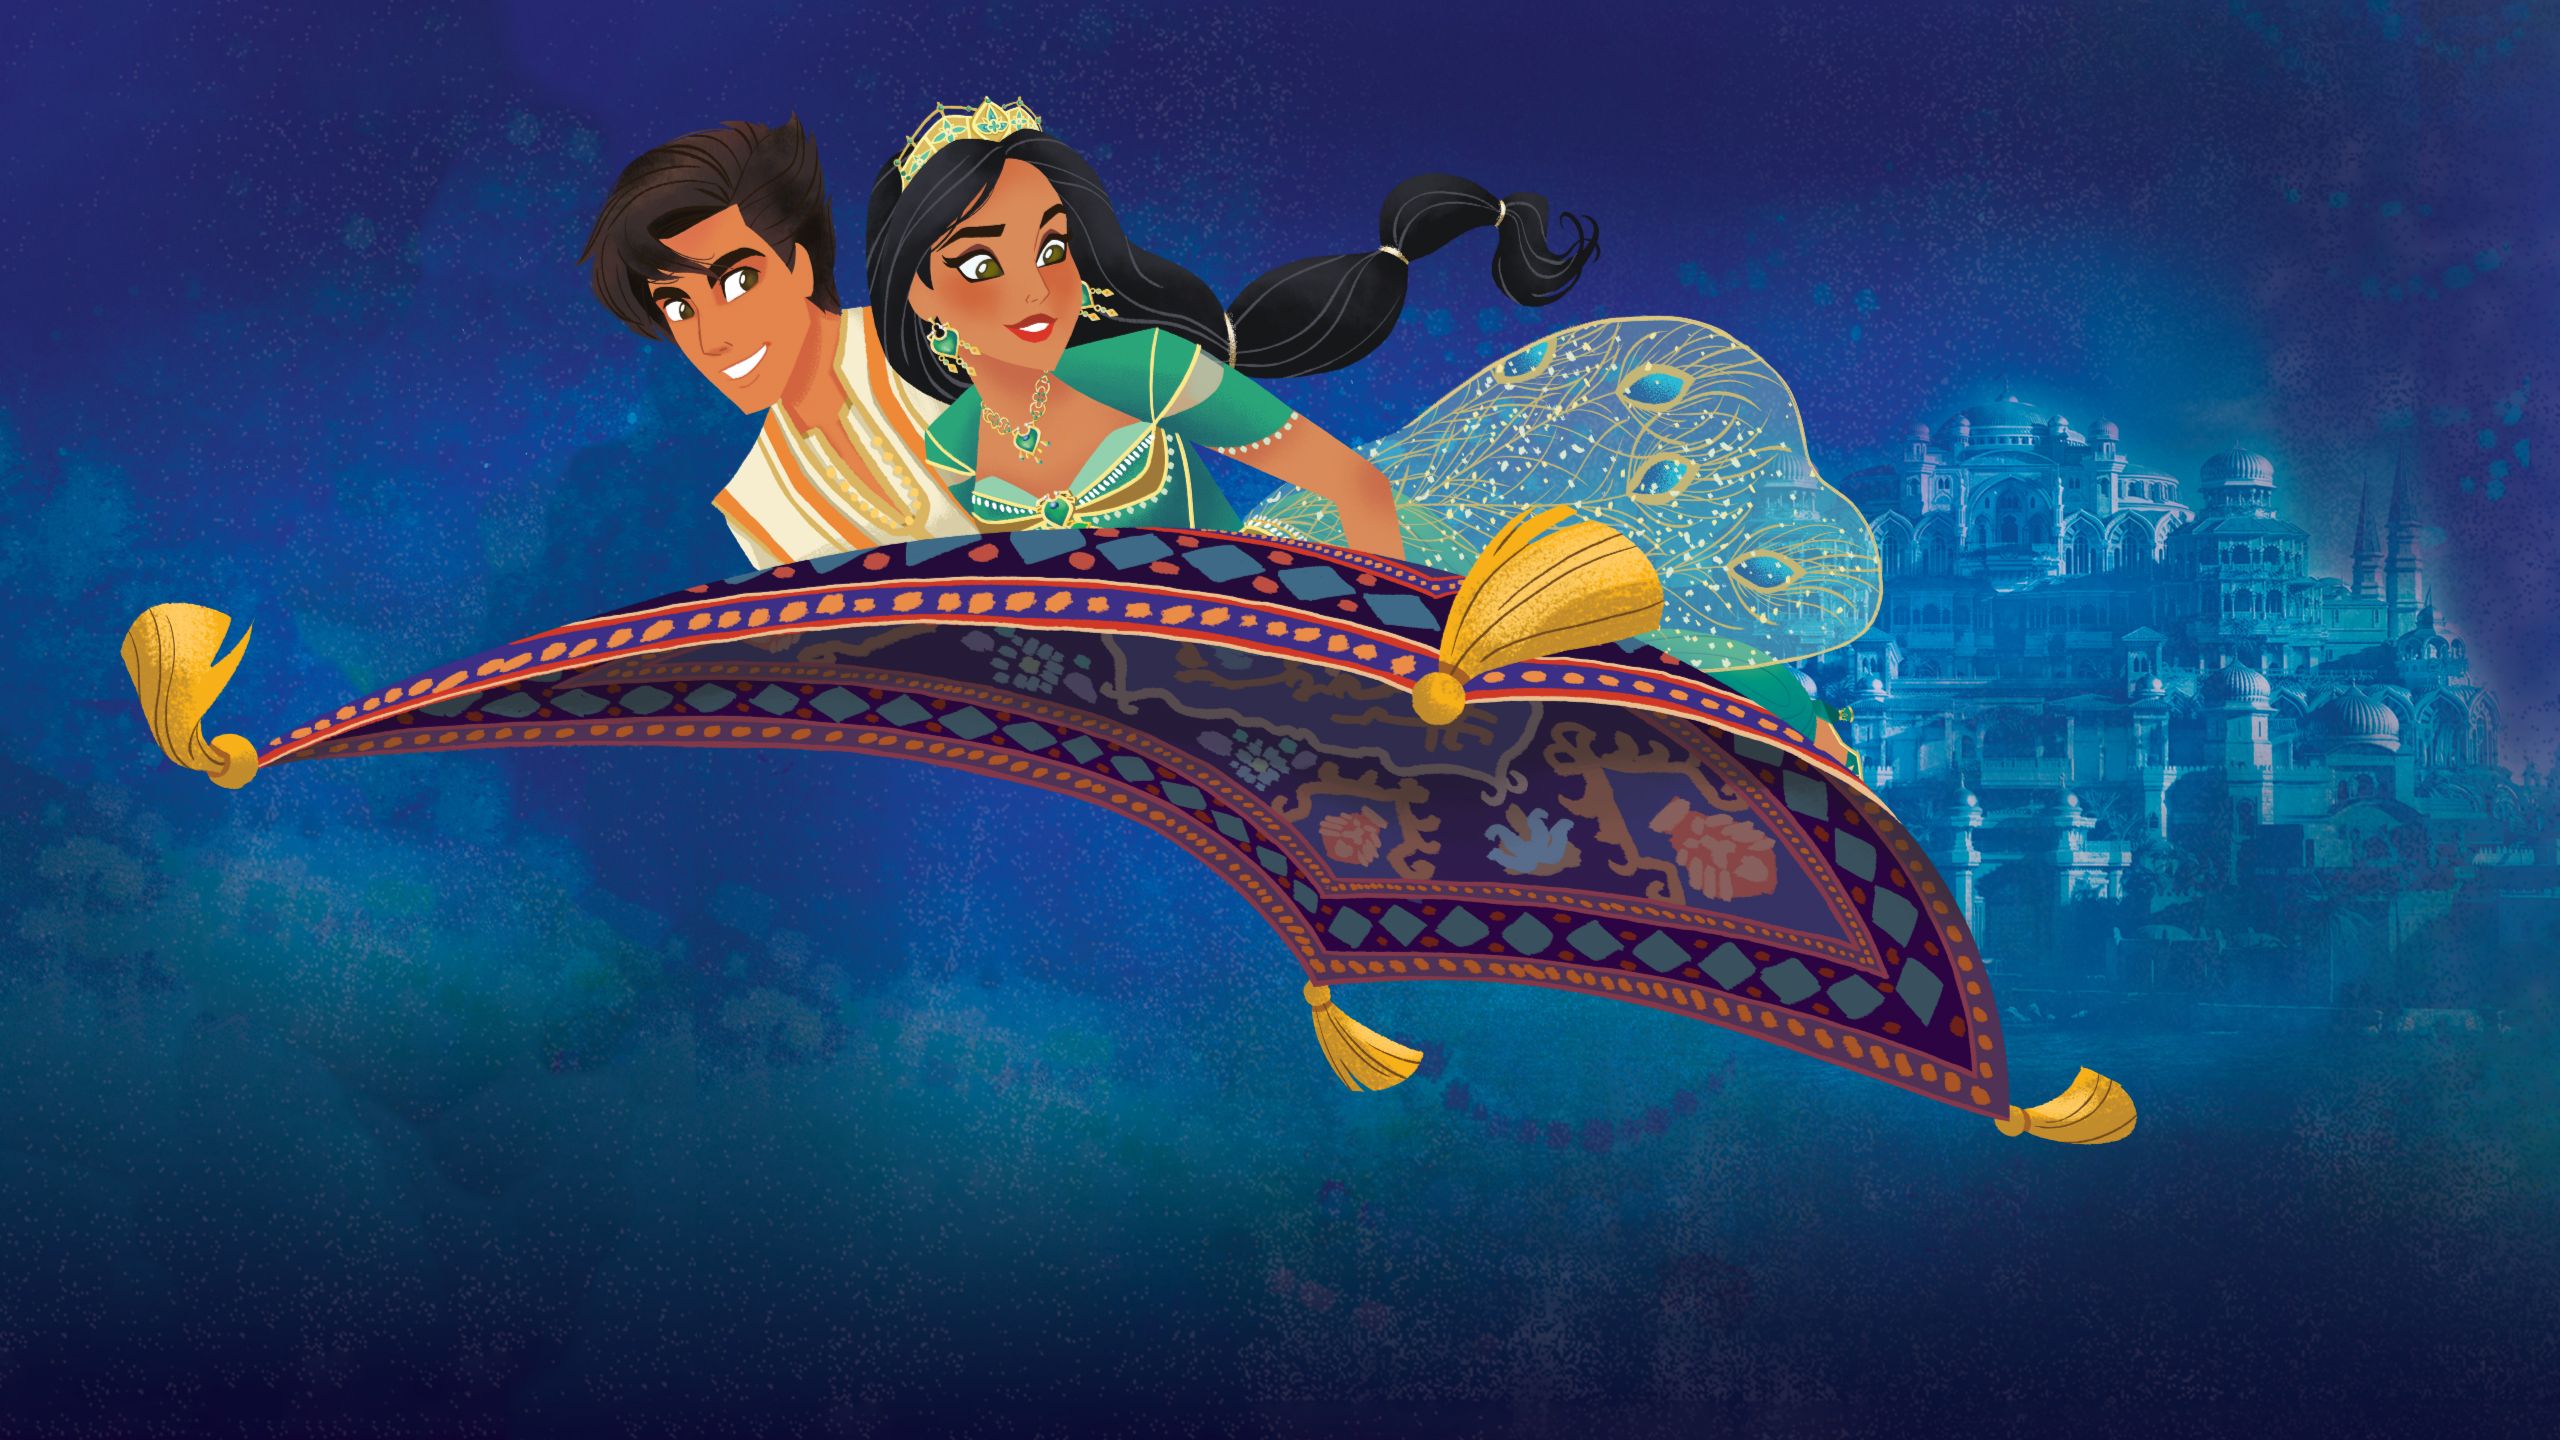 Aladdin Movie 2019 Wallpapers HD Cast Release Date Official Trailer   Posters  Designbolts